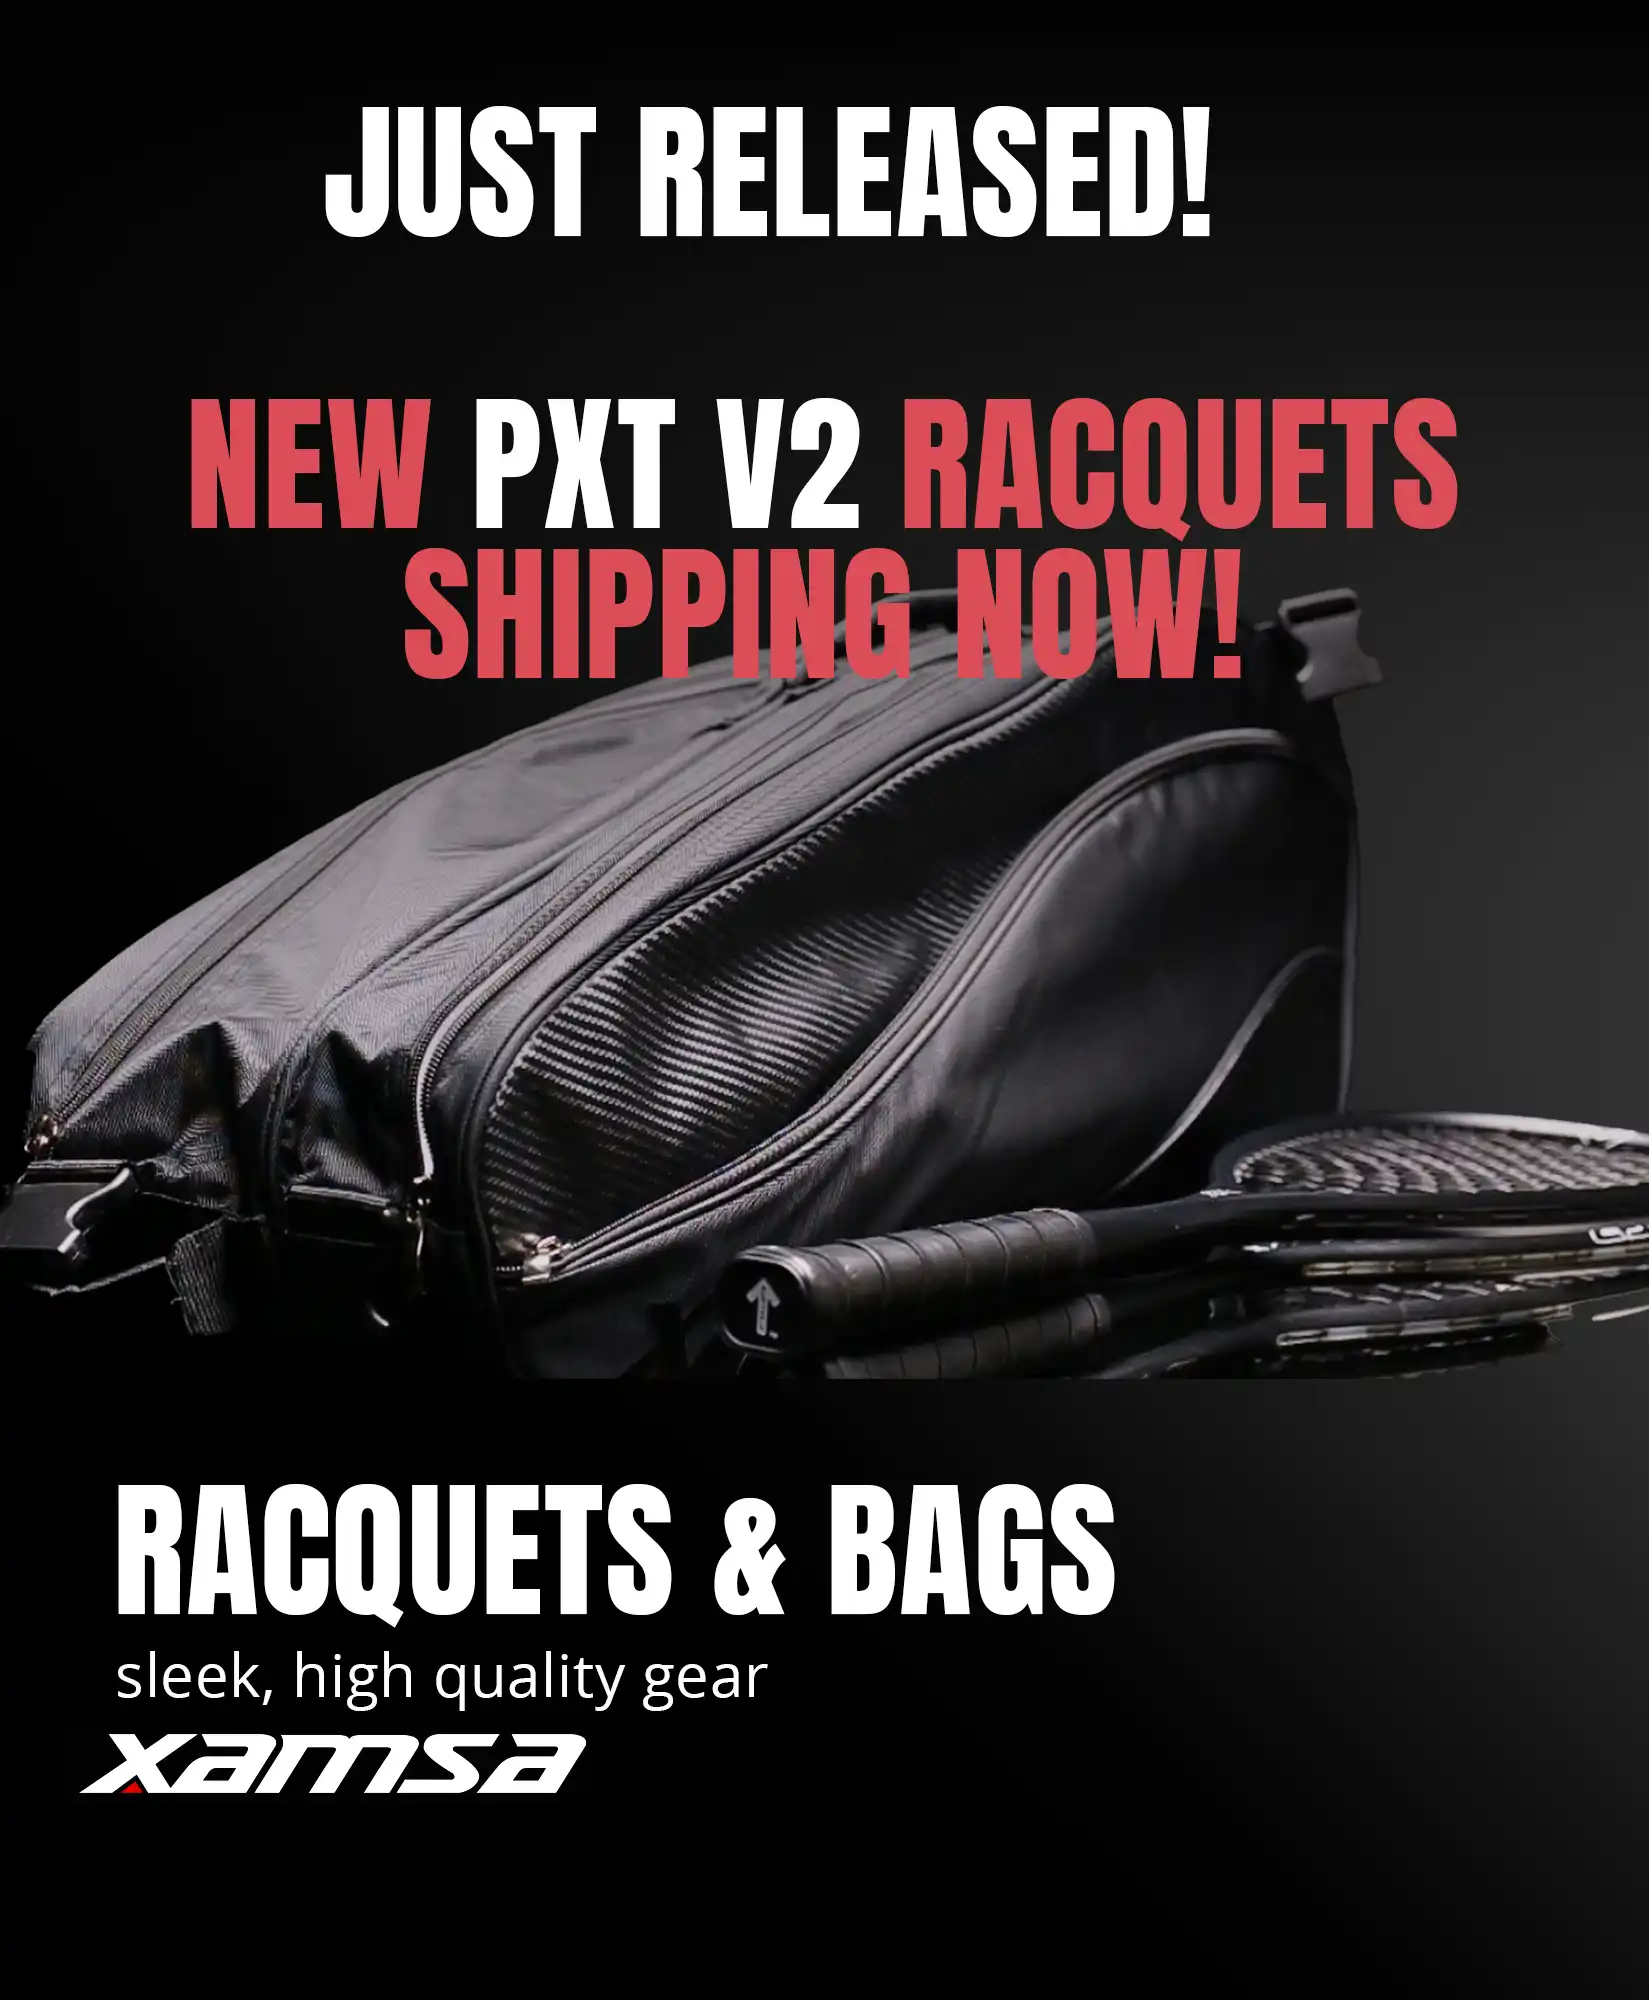 New PXT V2 racquets are shipping now.  Squash Racquets and bags.